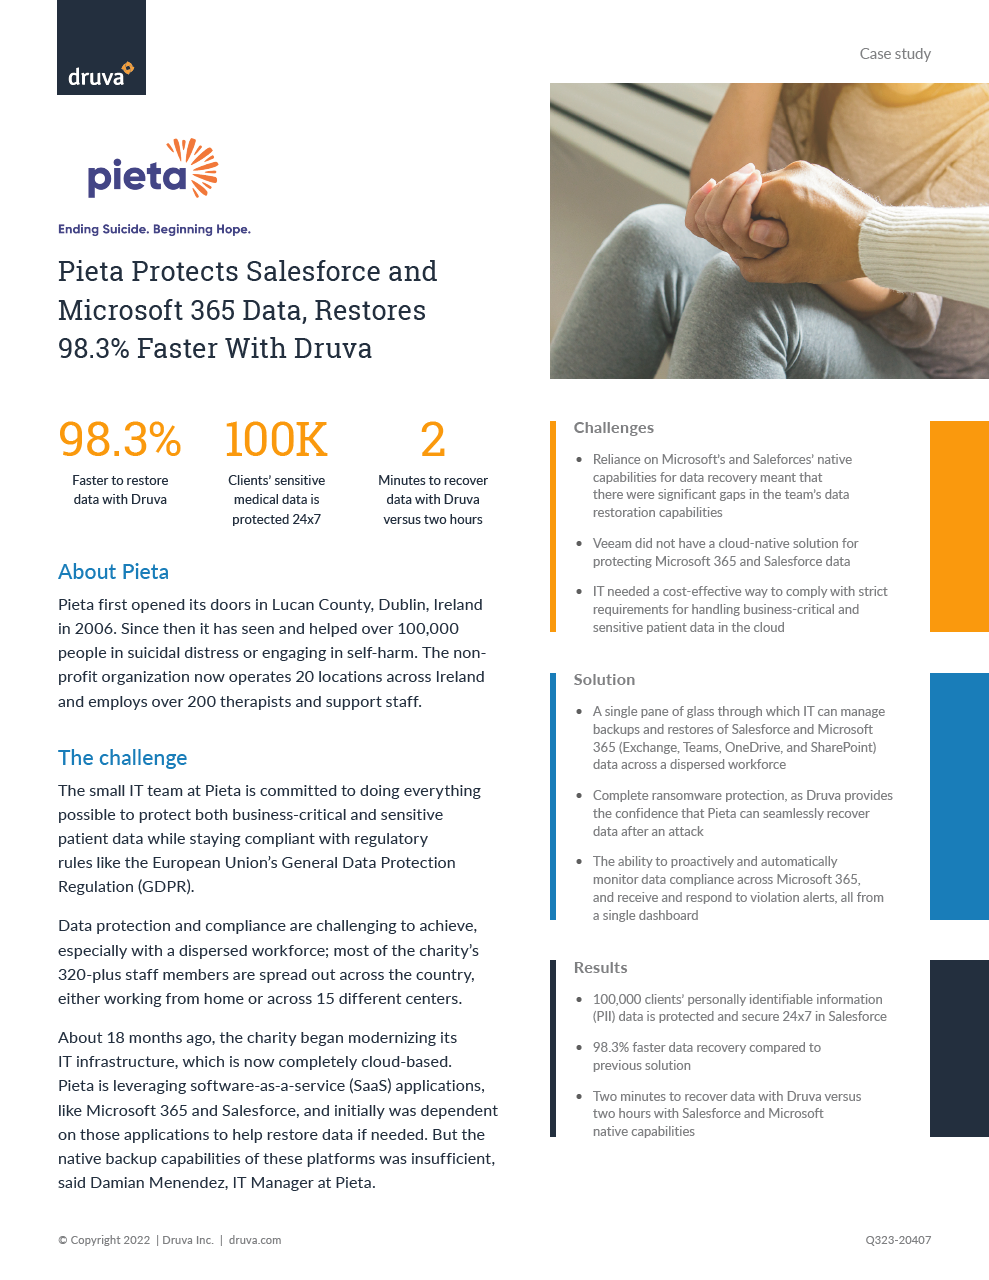 Pieta protects Salesforce and Microsoft 365 data, restores 98.3% faster with Druva